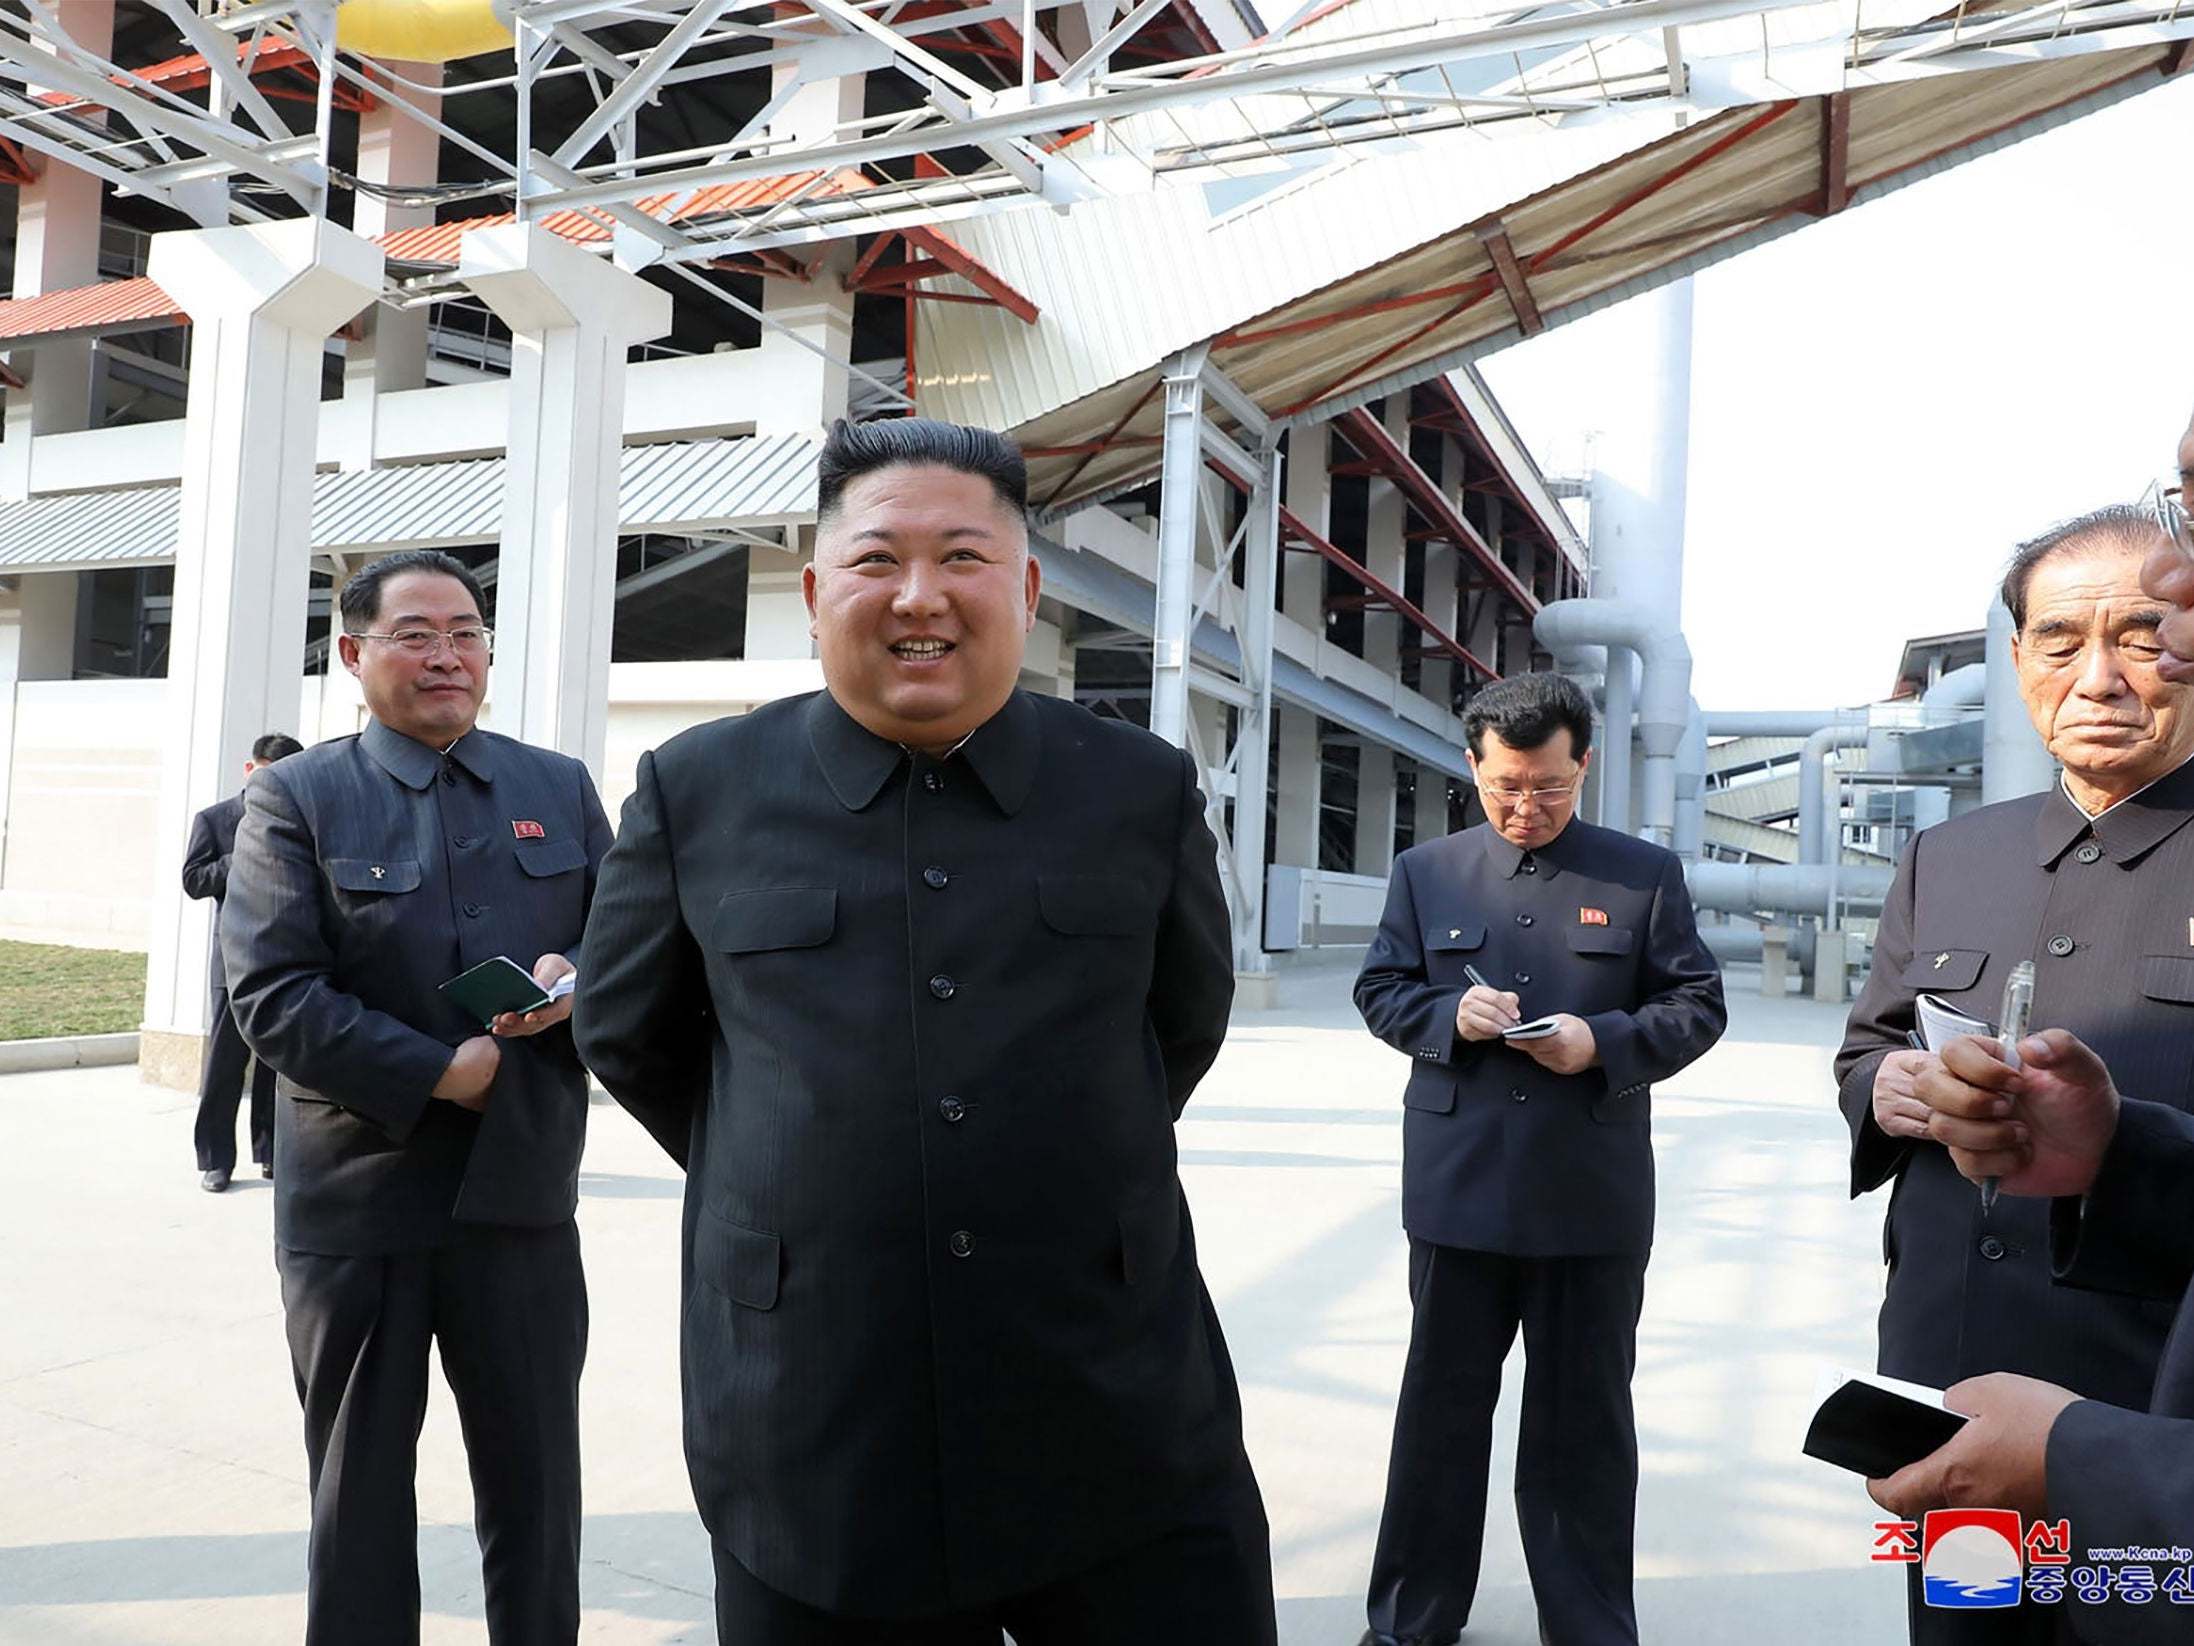 This picture, released from North Korea's official Korean Central News Agency (KCNA), shows North Korean leader Kim Jong Un visiting the completed Suchon phosphate fertilizer factory in South Pyongan Province